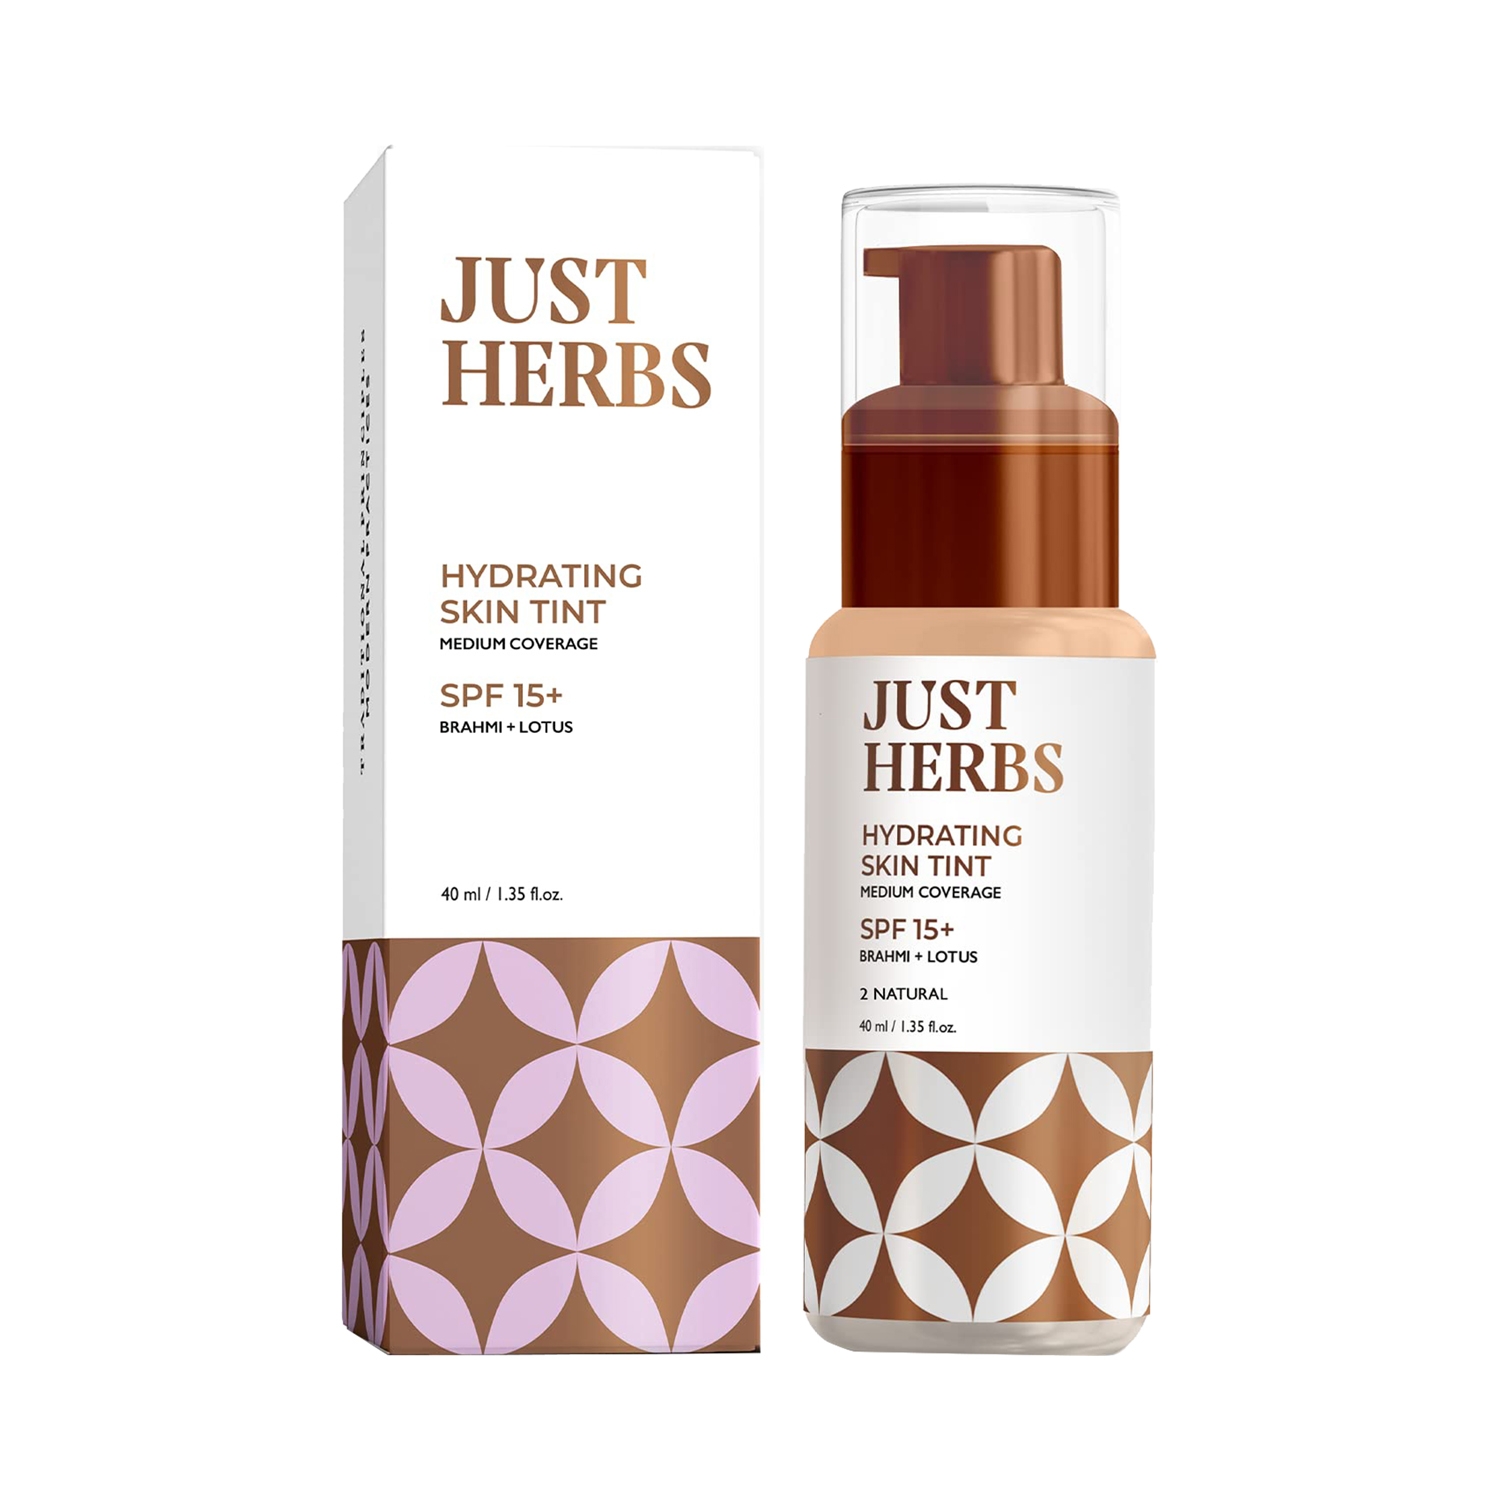 Just Herbs | Just Herbs Hydrating Skin Tint BB Cream Foundation - 2 Natural (40ml)